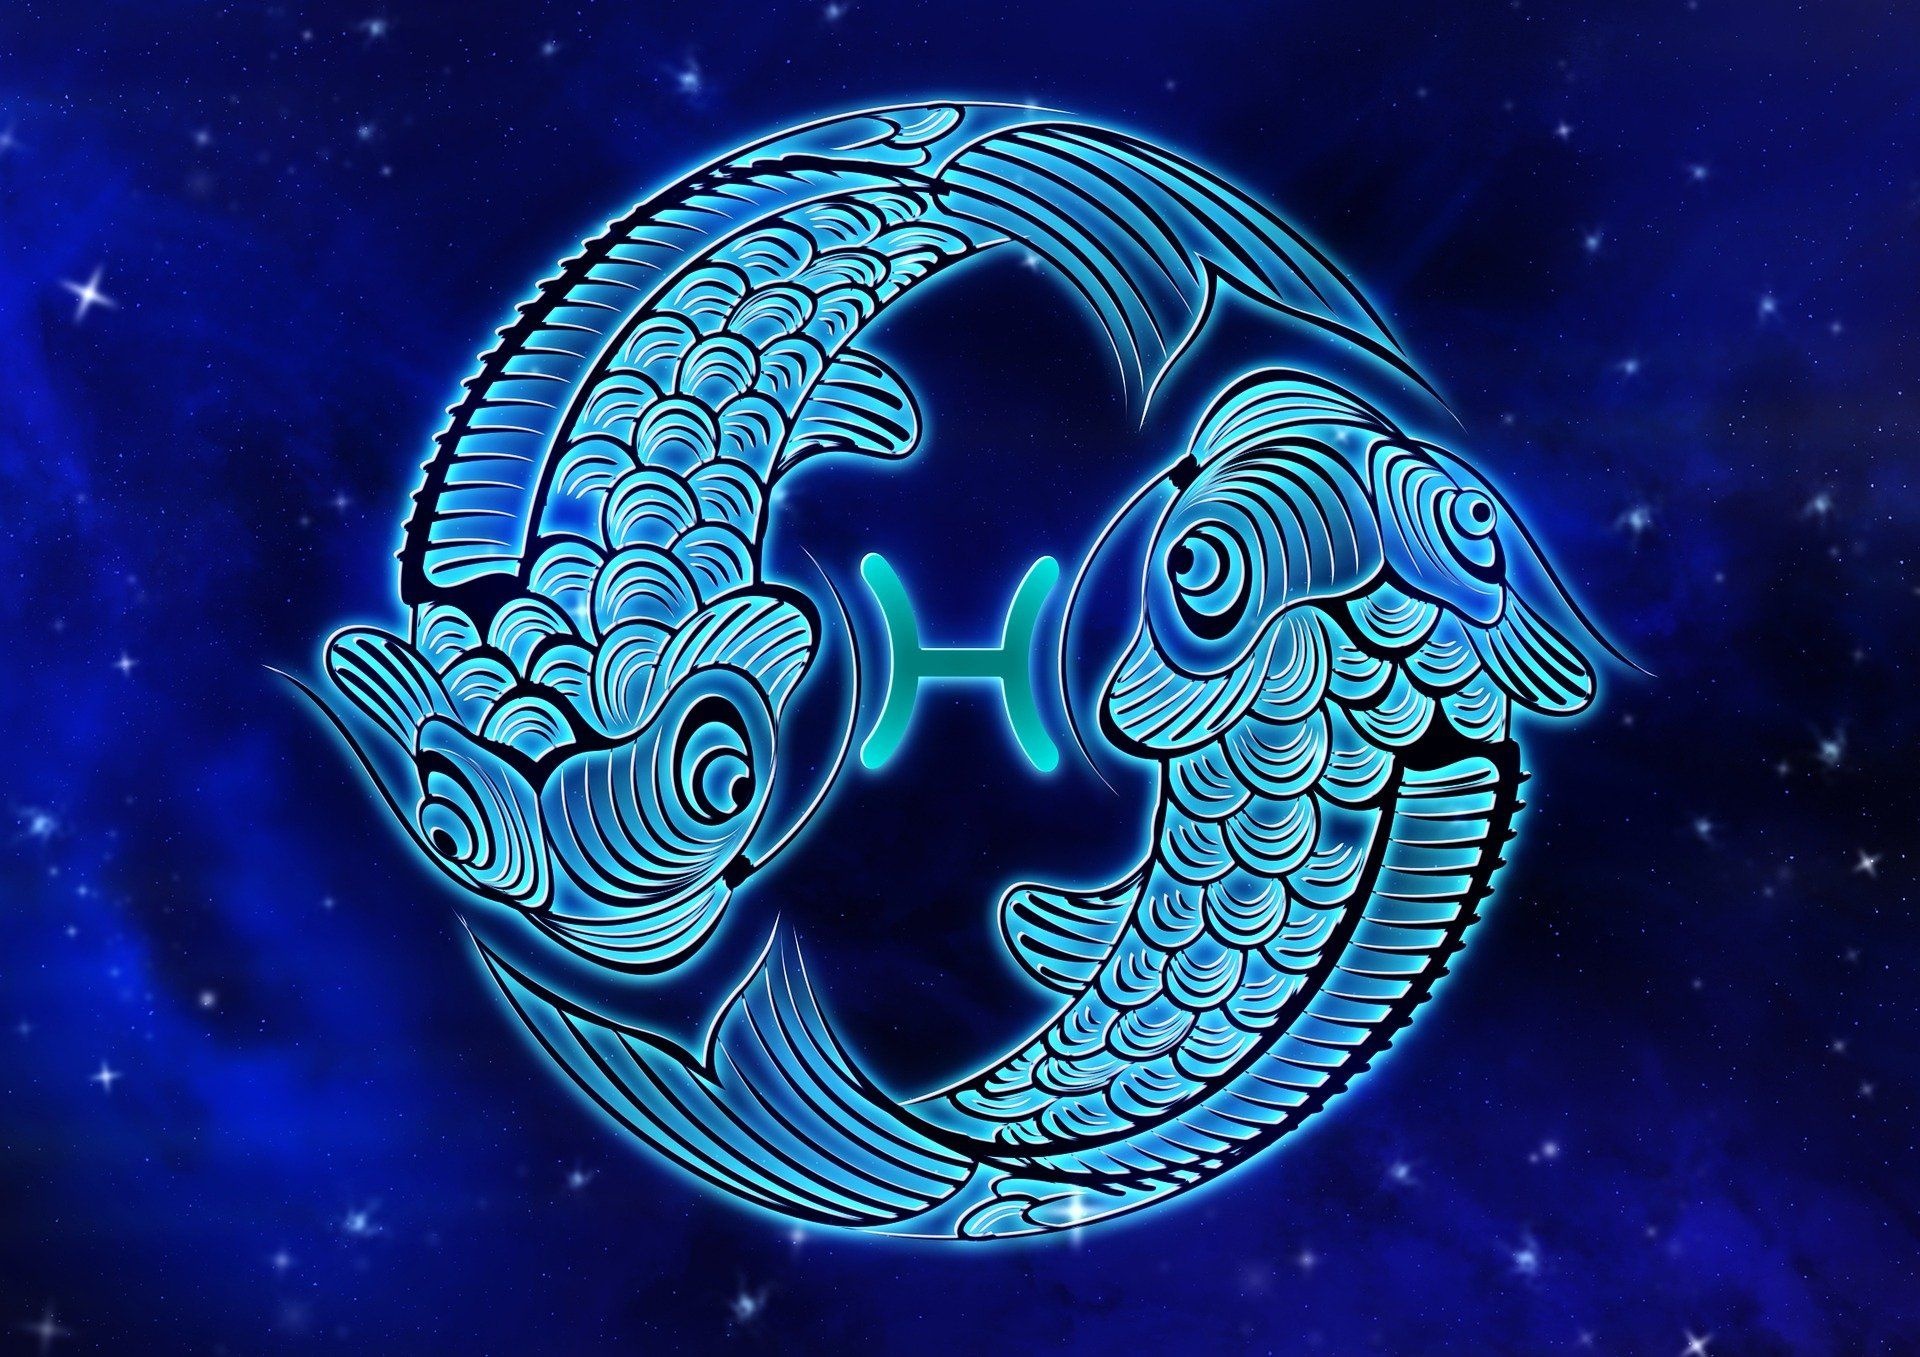 Pisces Zodiac Sign, Free wallpapers, Zodiac sign backgrounds, Personal expression, 1920x1360 HD Desktop